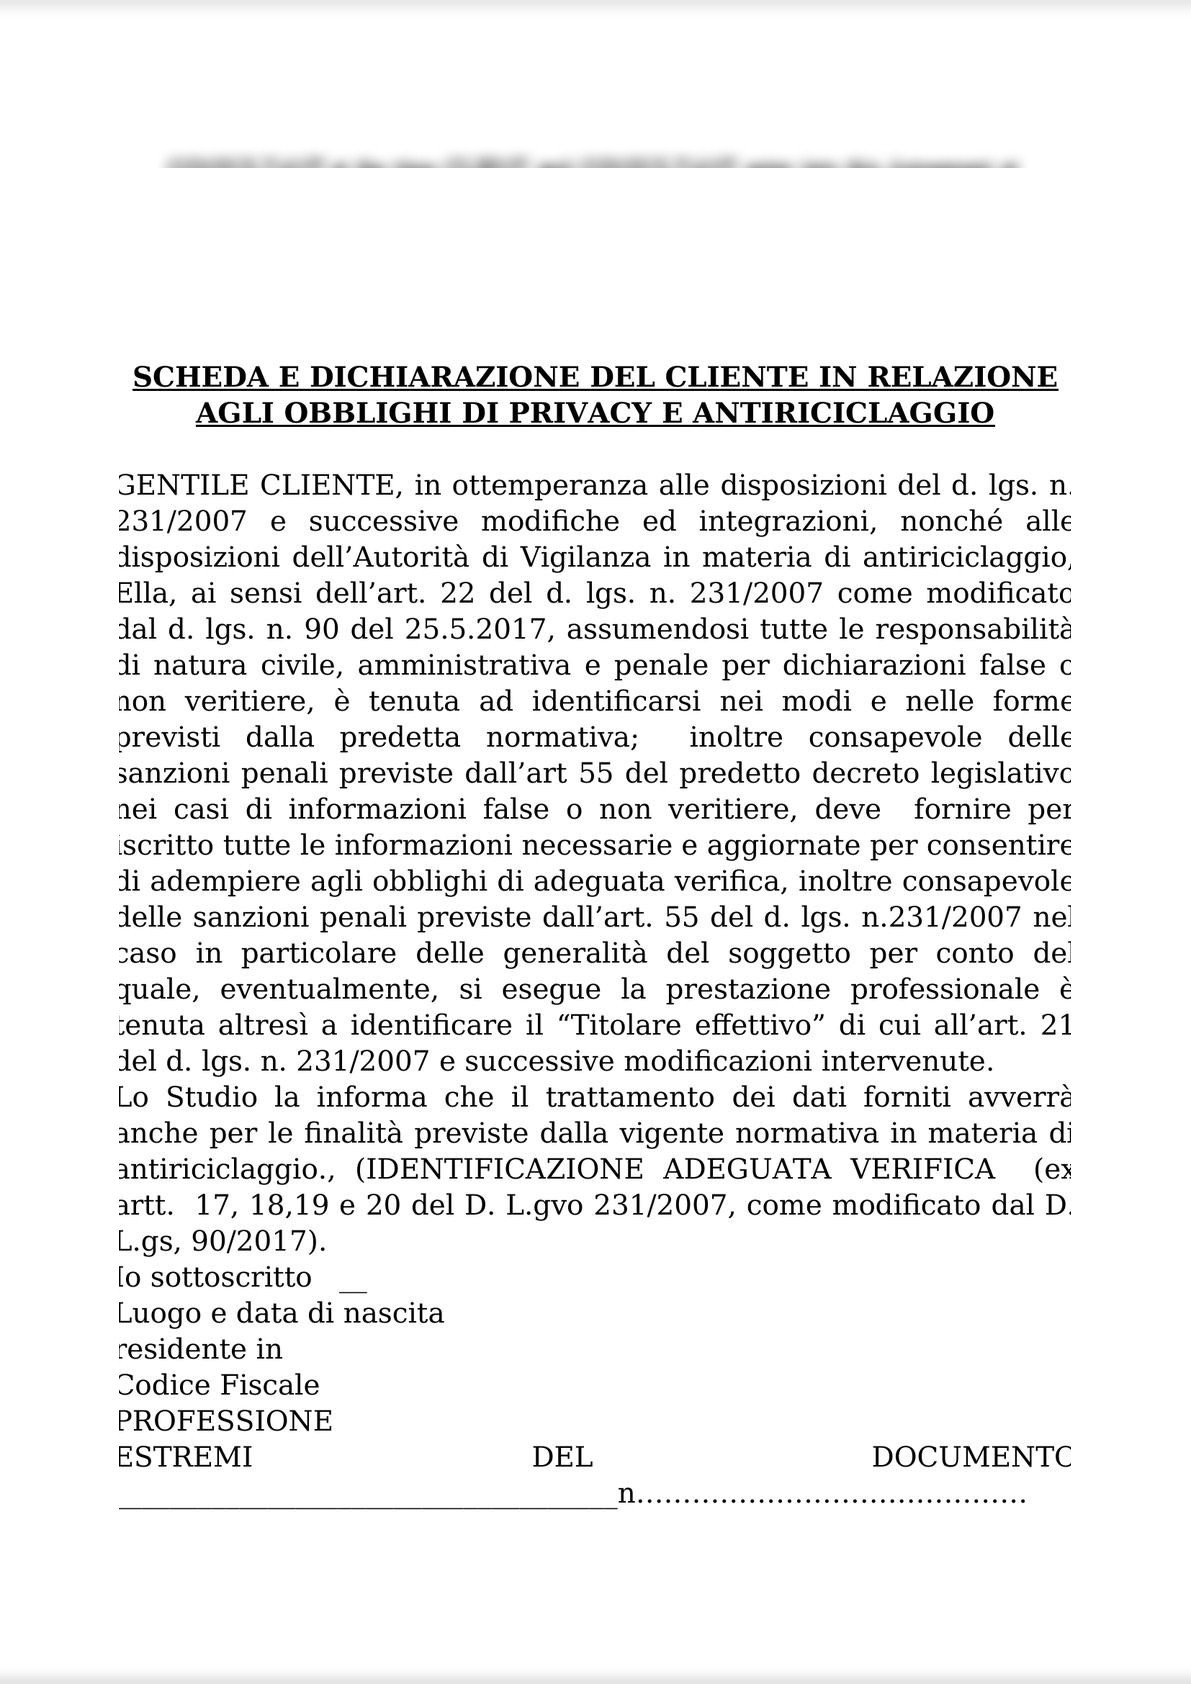 INTELLECTUAL WORK AGREEMENT FOR OUT-OF-COURT ACTIVITIES AND ATTACHMENTS 1 (PRIVACY); 2 (ANTI-MONEY LAUNDERING); AND 3 FEE QUOTE / CONTRATTO D’OPERA INTELLETTUALE STRAGIUDIZIALE-9